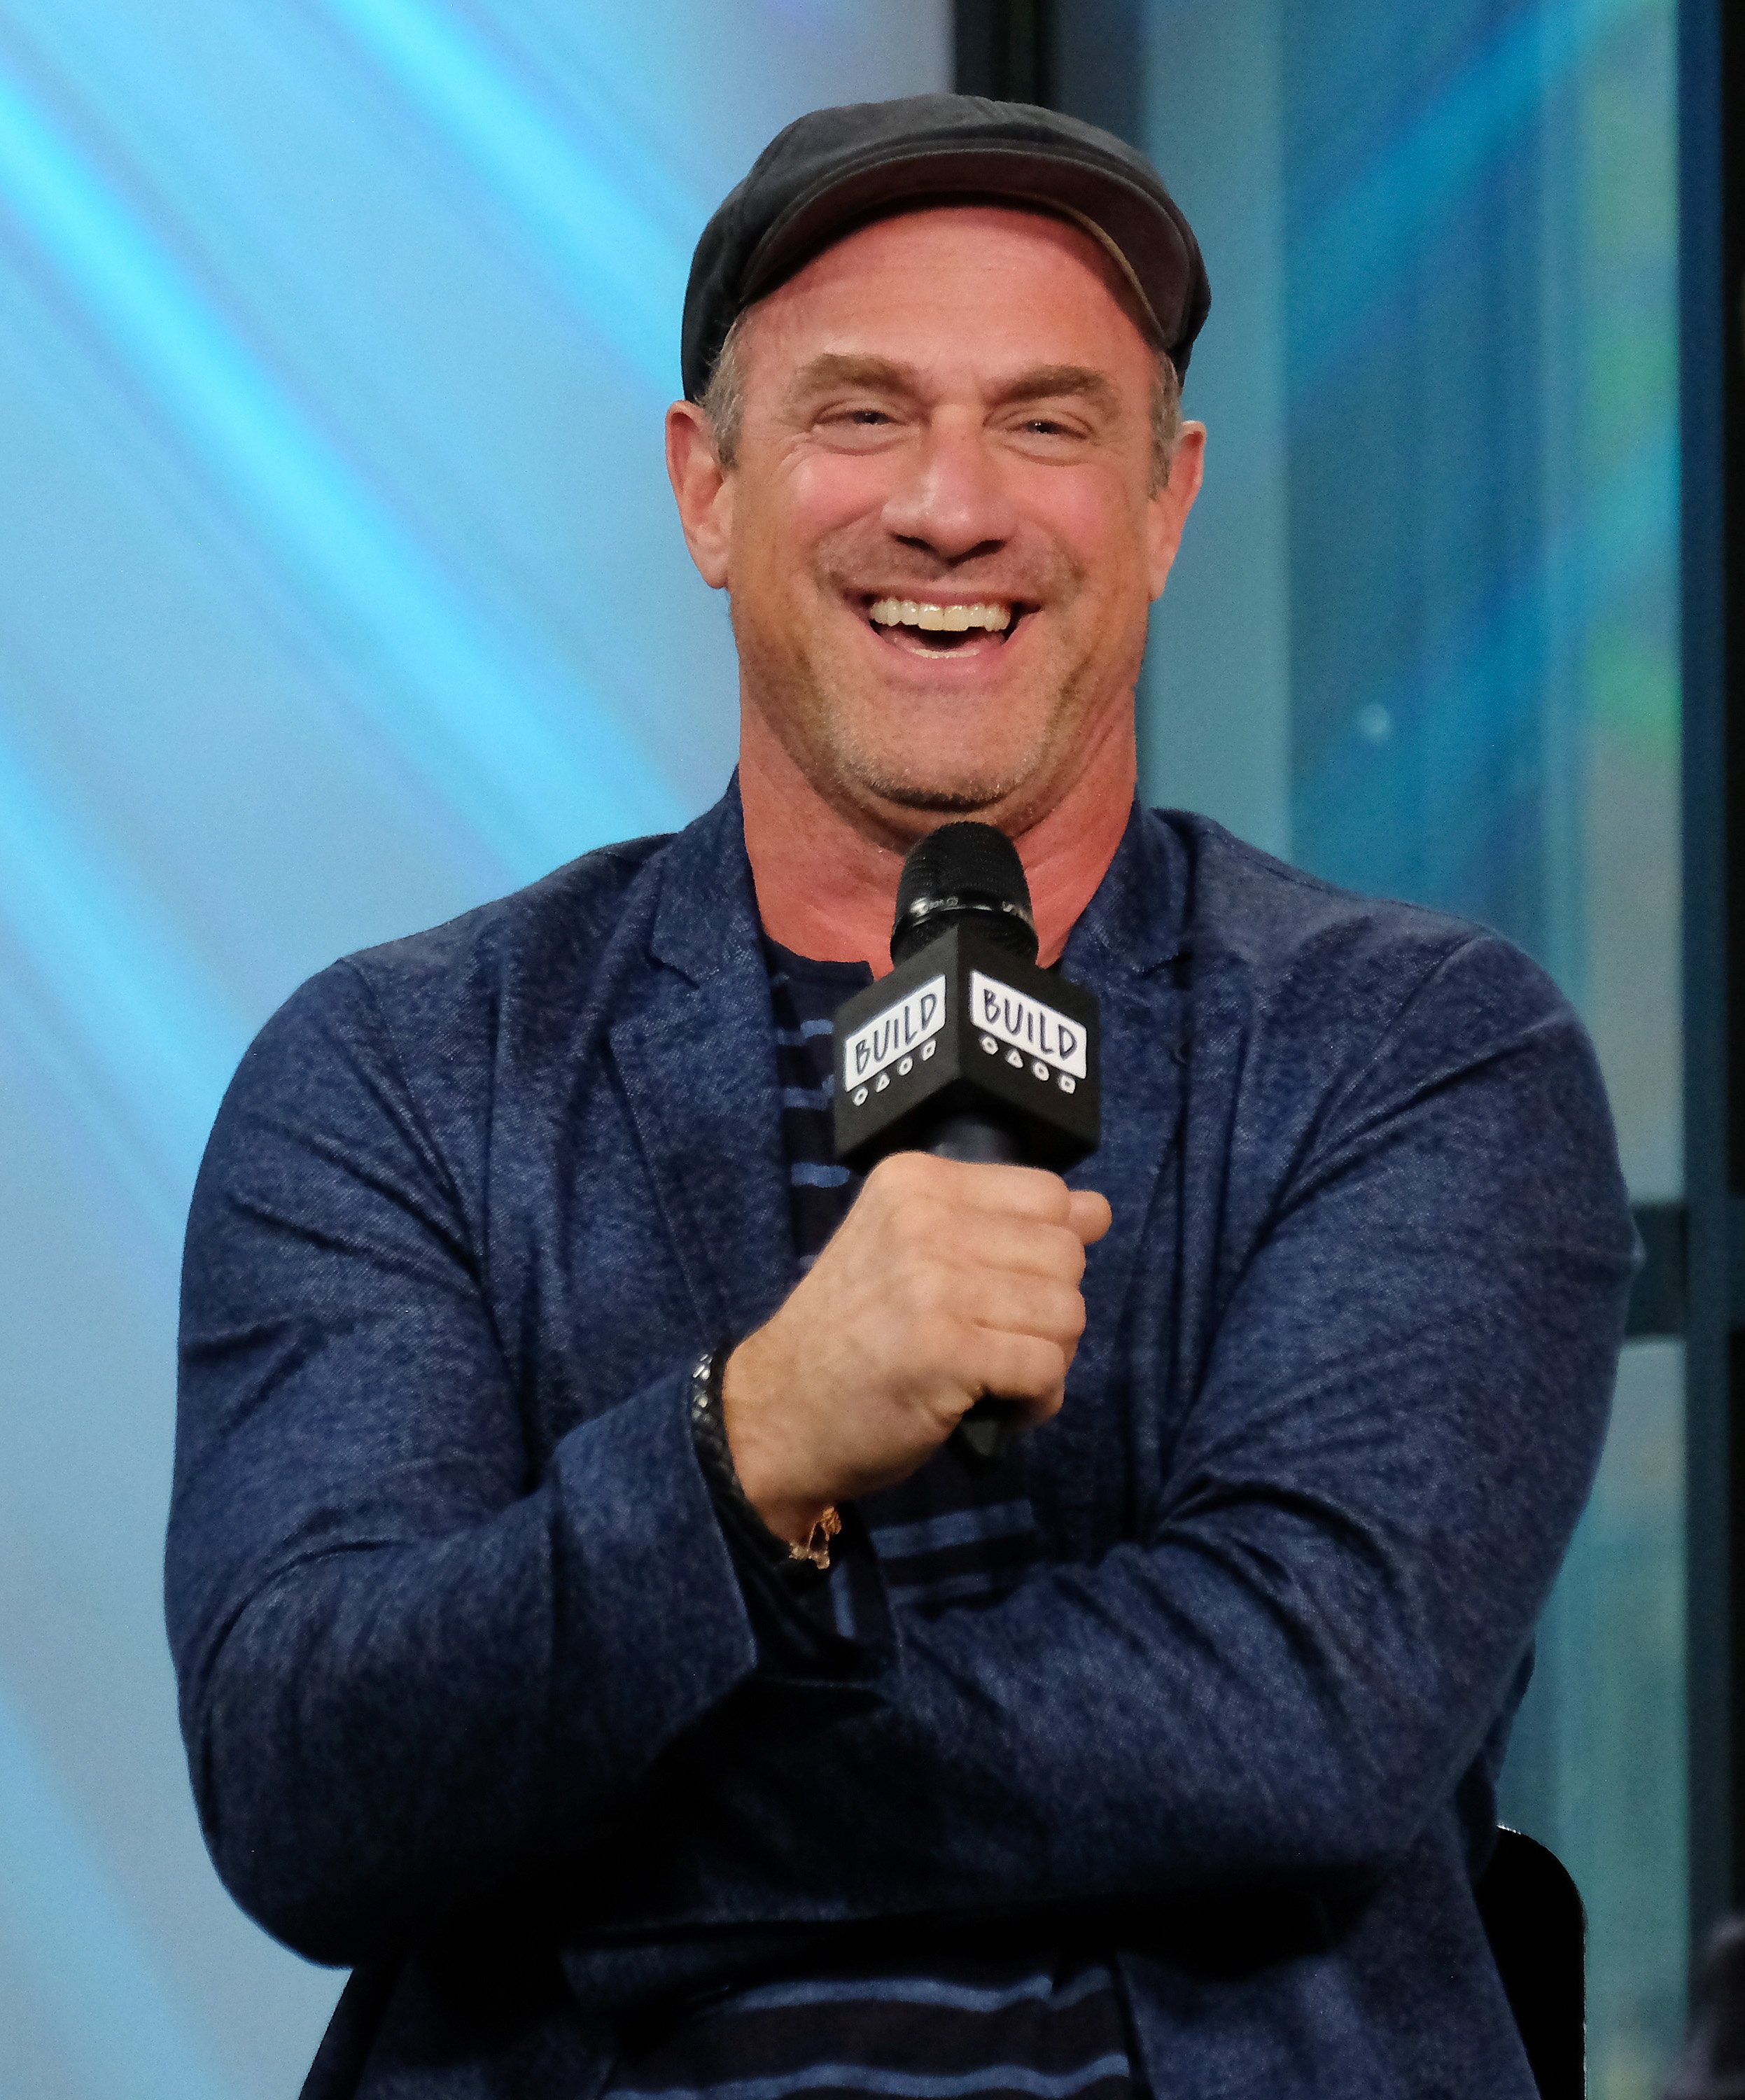 Christopher Meloni attends the Build Series to discuss the New Movie "Snatched" at Build Studio on May 8, 2017 in New York City. | Photo: GettyImages